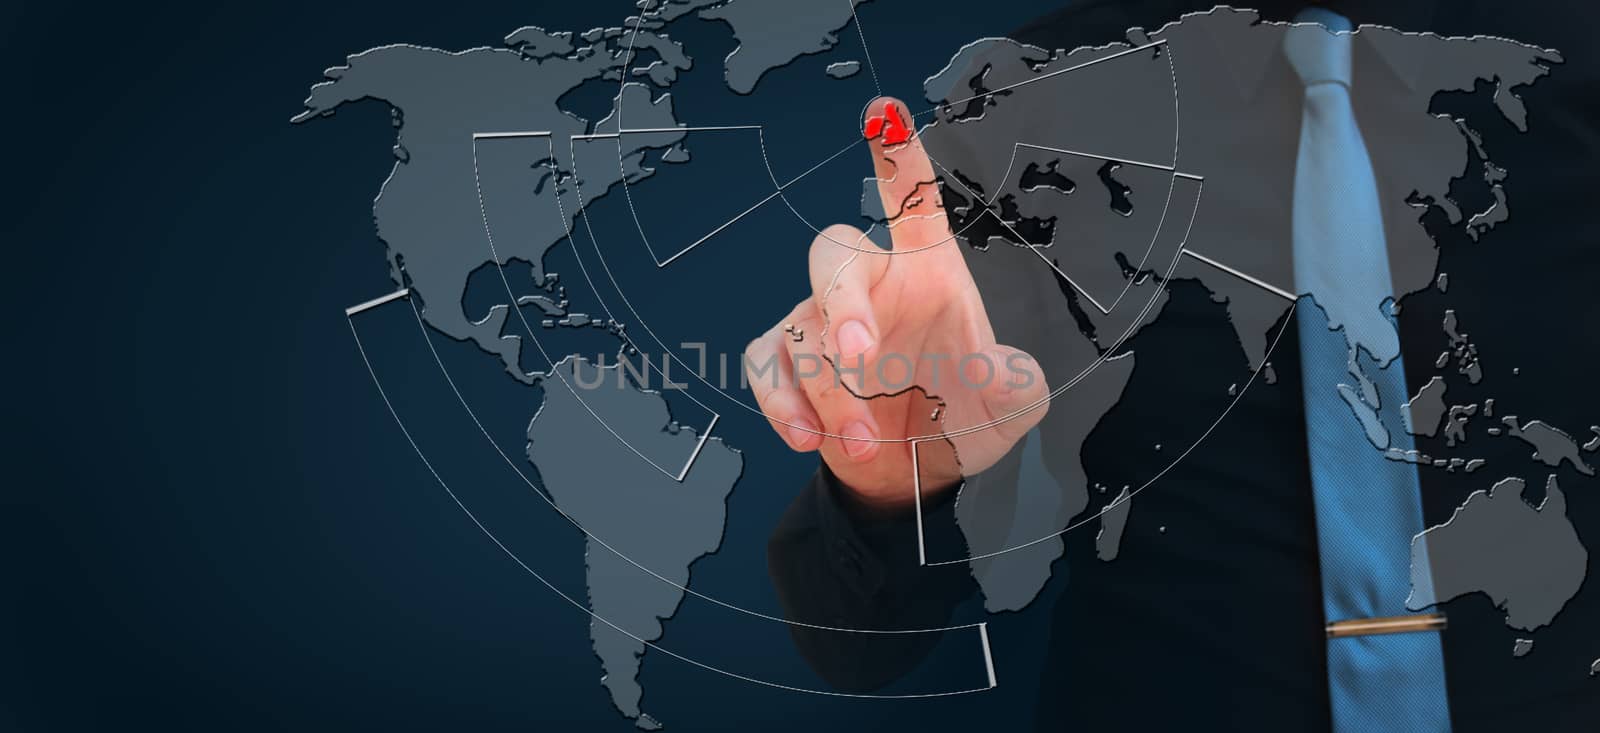 Busieness man pointing finger on UK on the virtual world map, brexit concept by negmardesign